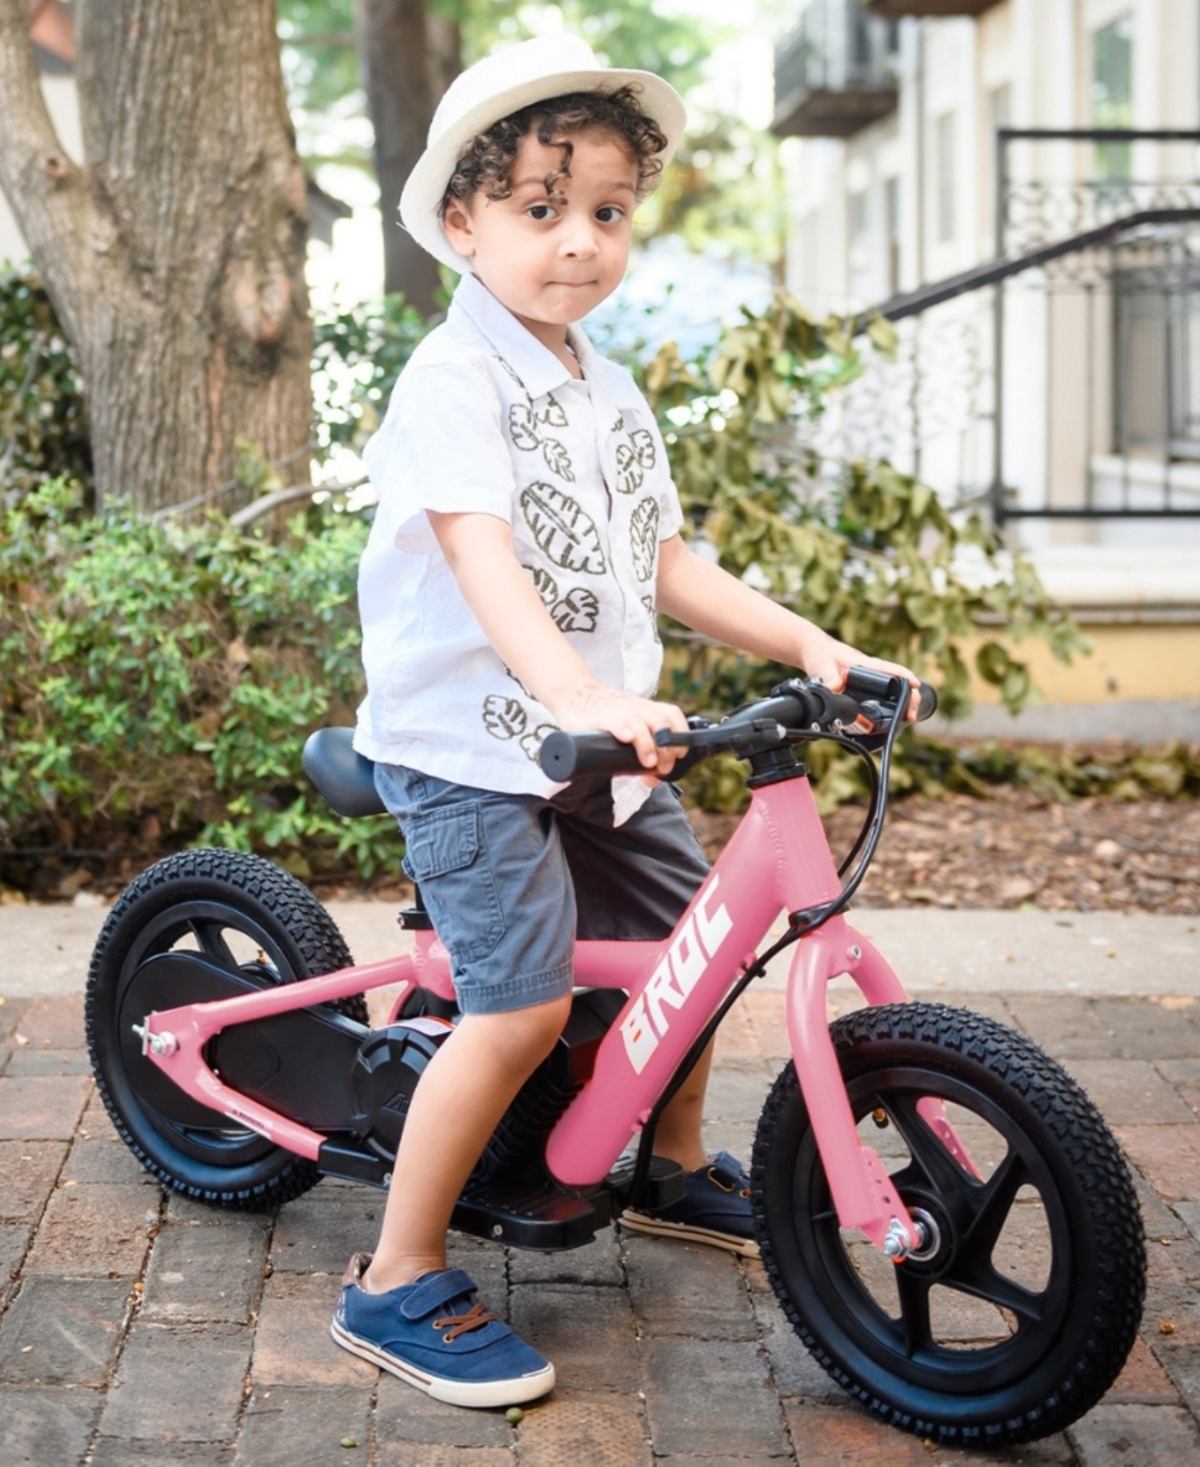 Shop Best Ride On Cars Broc Usa E-bikes D12 Powered Ride-on In Pink